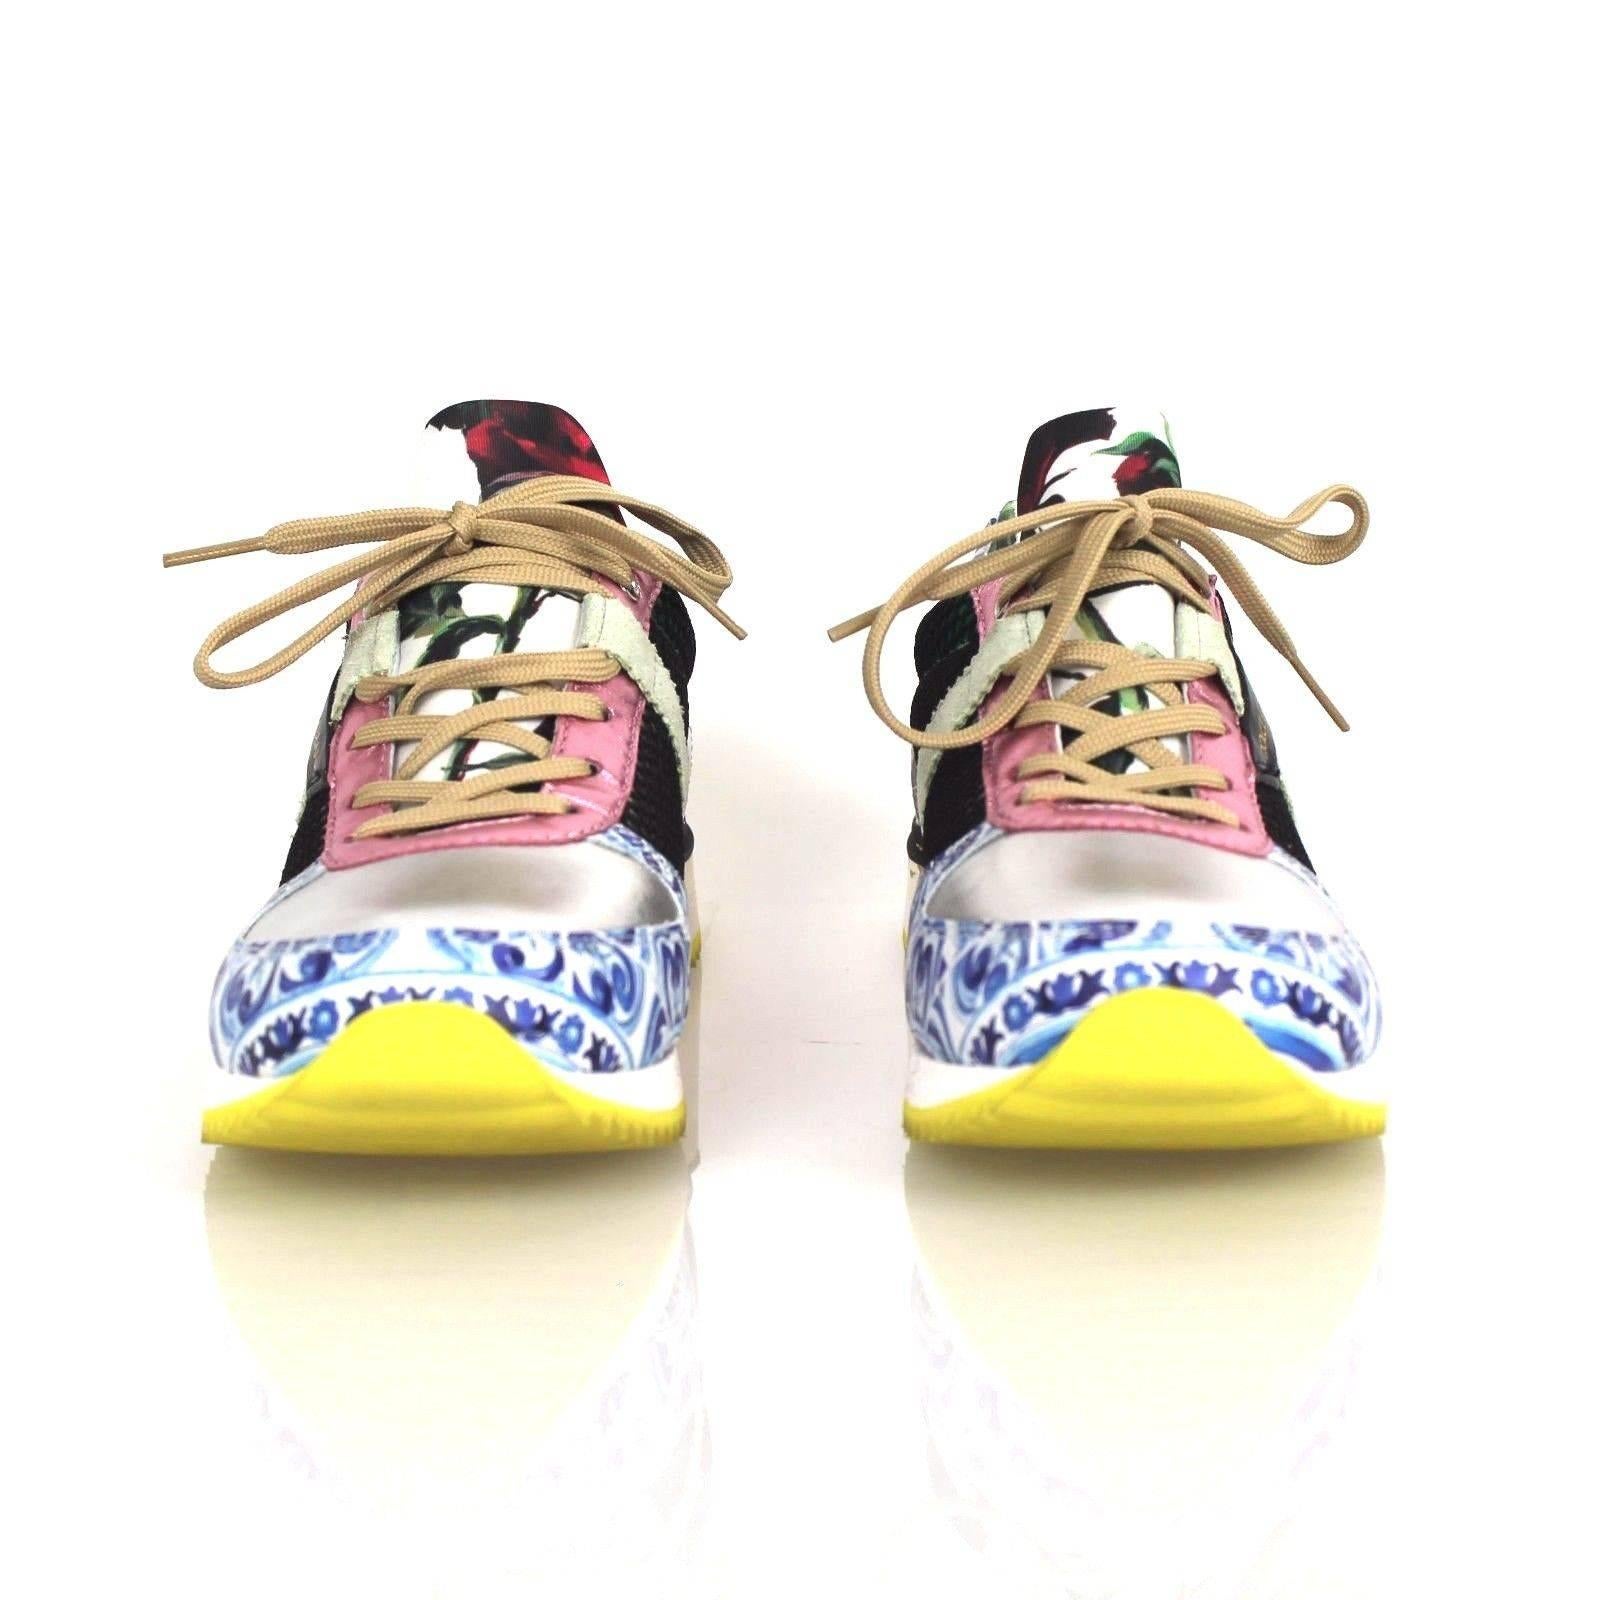 These exceptionally bold and eye catching sneakers features: Removable insole, lace-up style, textile and leather upper and lining/rubber sole, by Dolce&Gabbana; made in Italy, salon shoes.

Conditions: Brand new, but is a display item so has